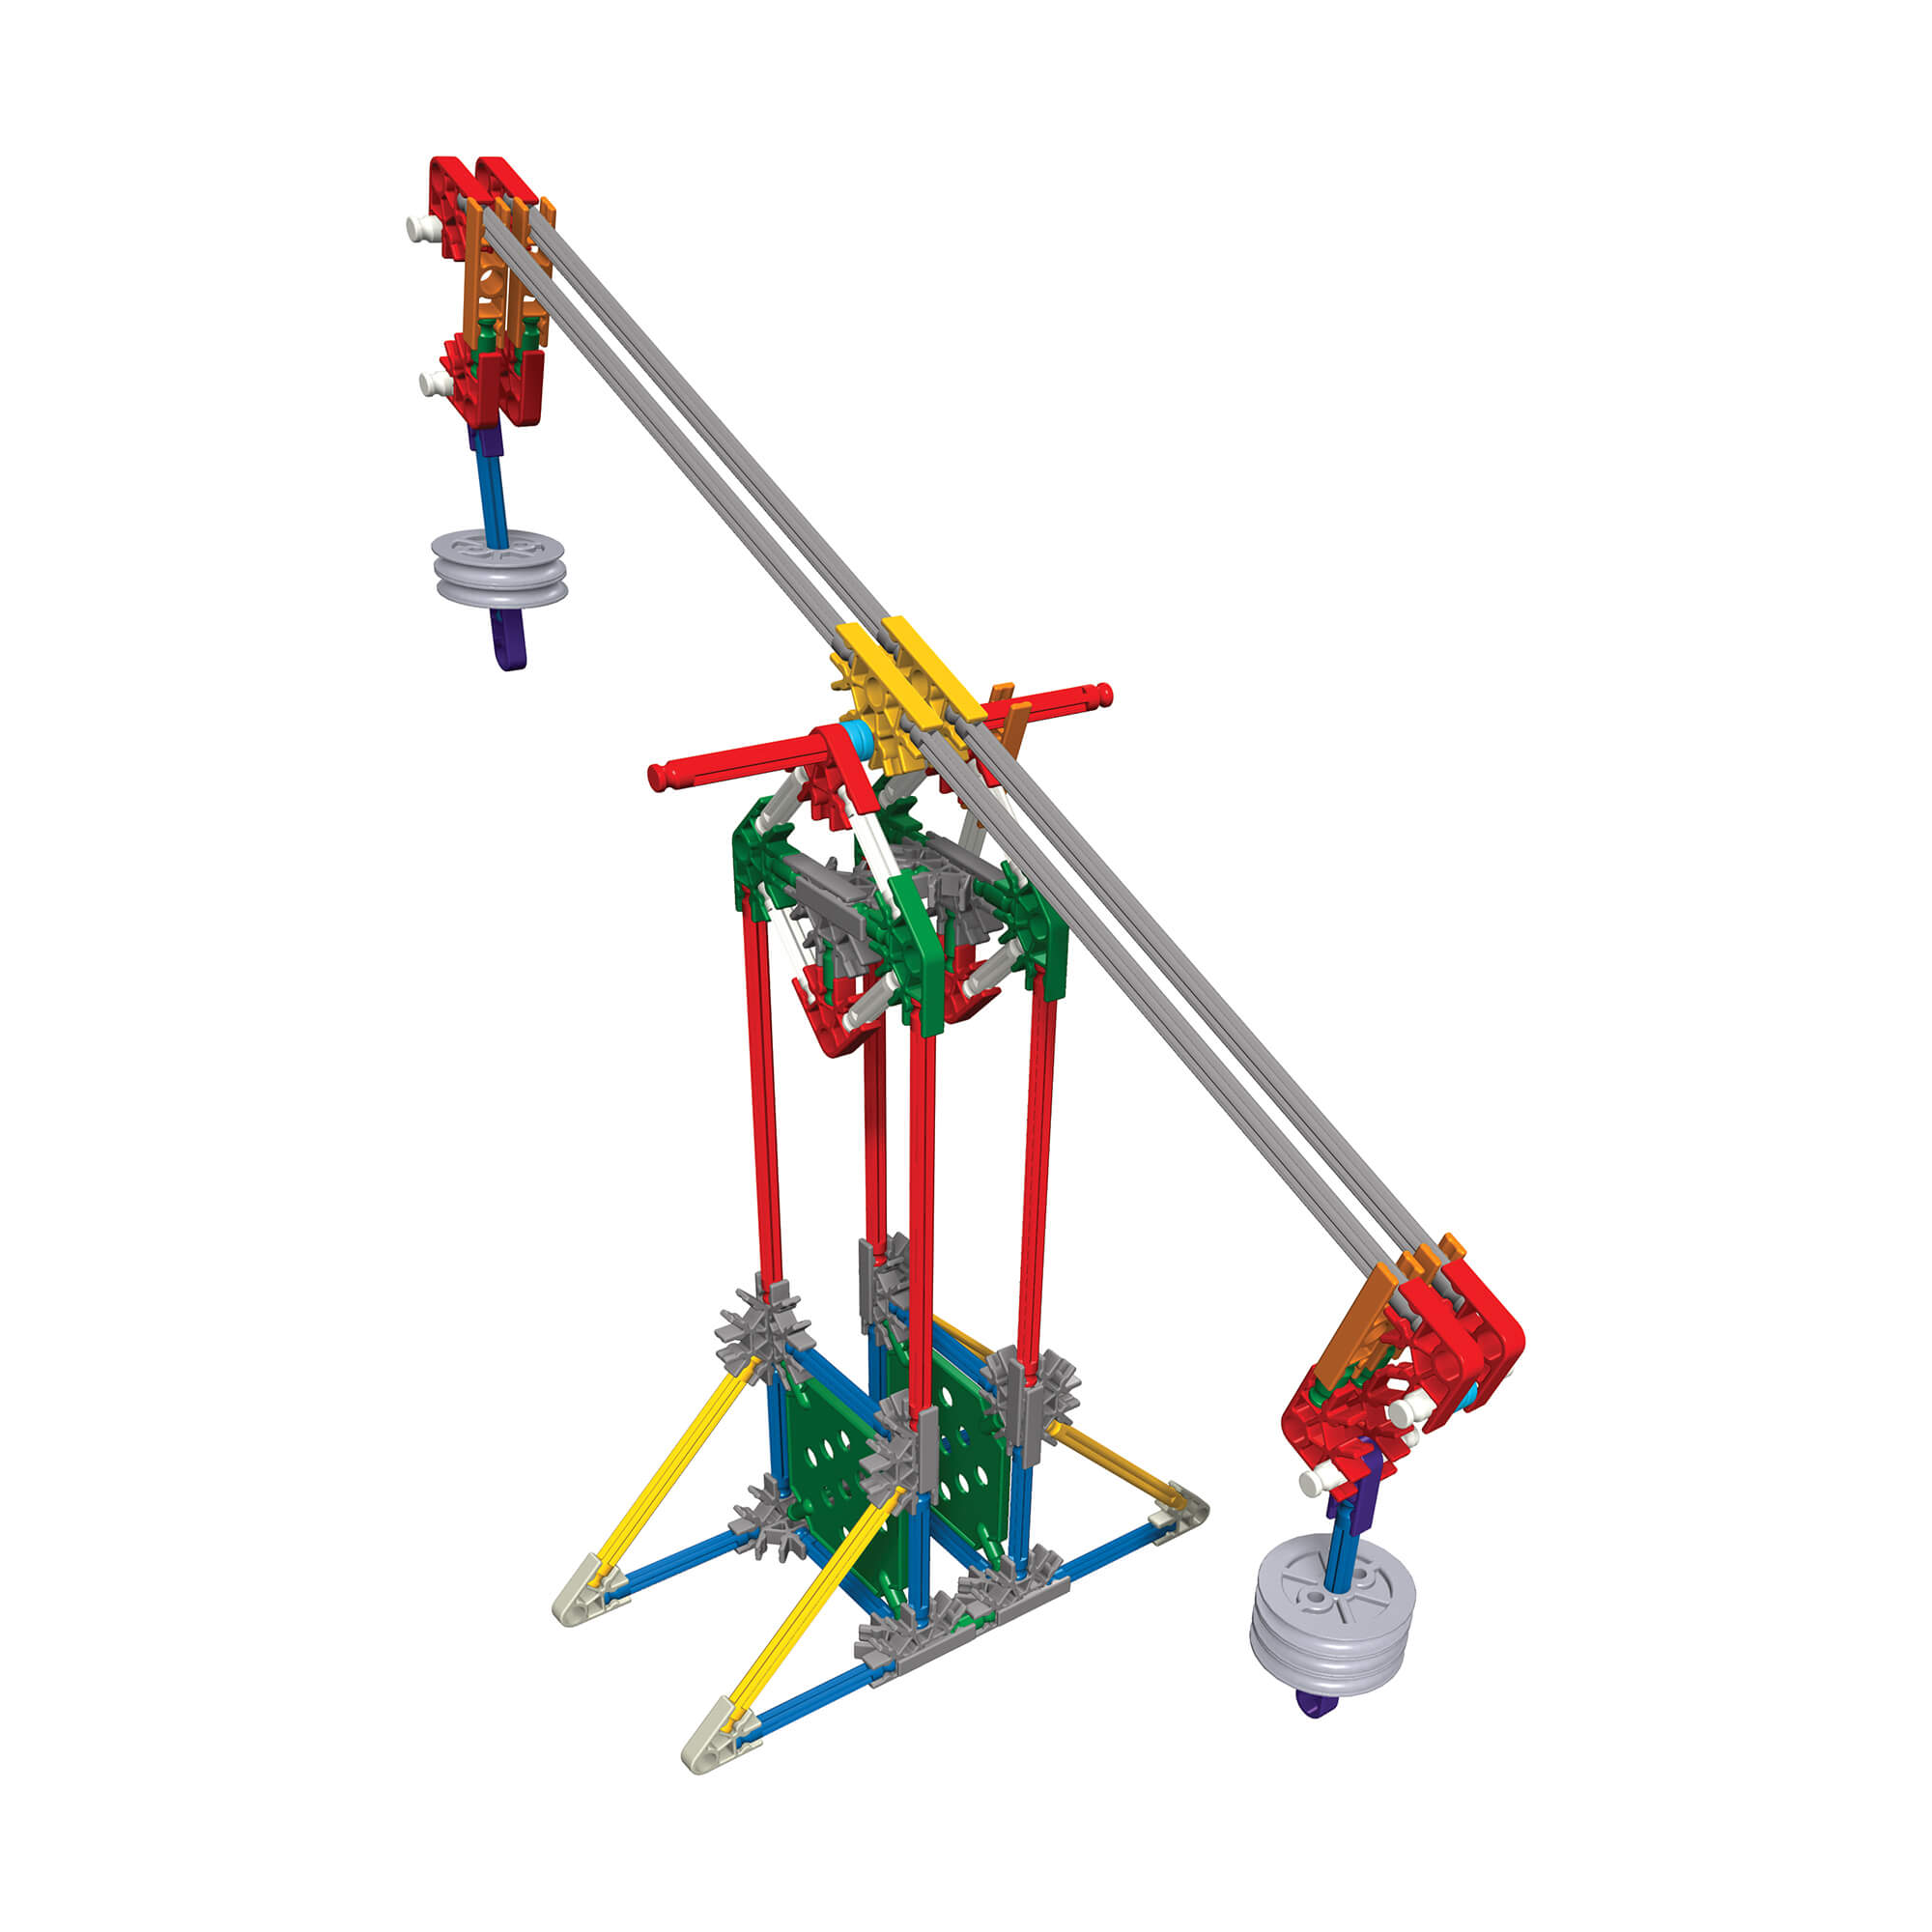 K'NEX Education Introduction to Simple Machines: Levers & Pulleys